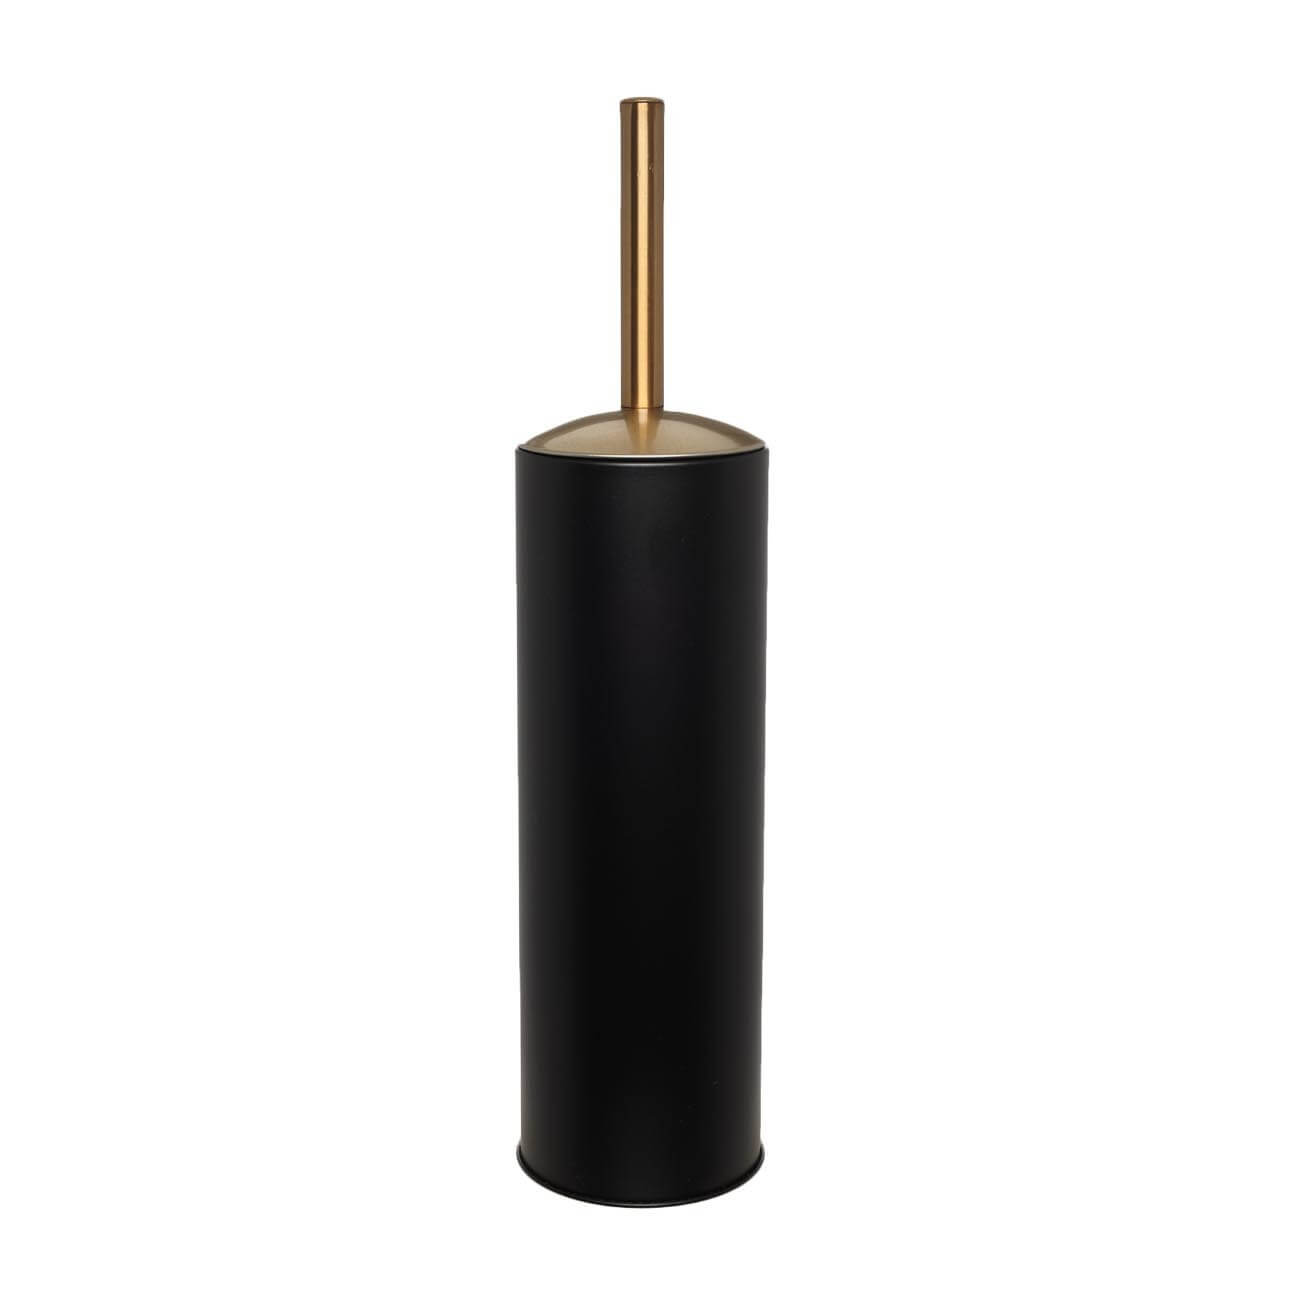 Toilet brush, 28 cm, with stand, plastic / metal, black and gold, Black chic изображение № 1